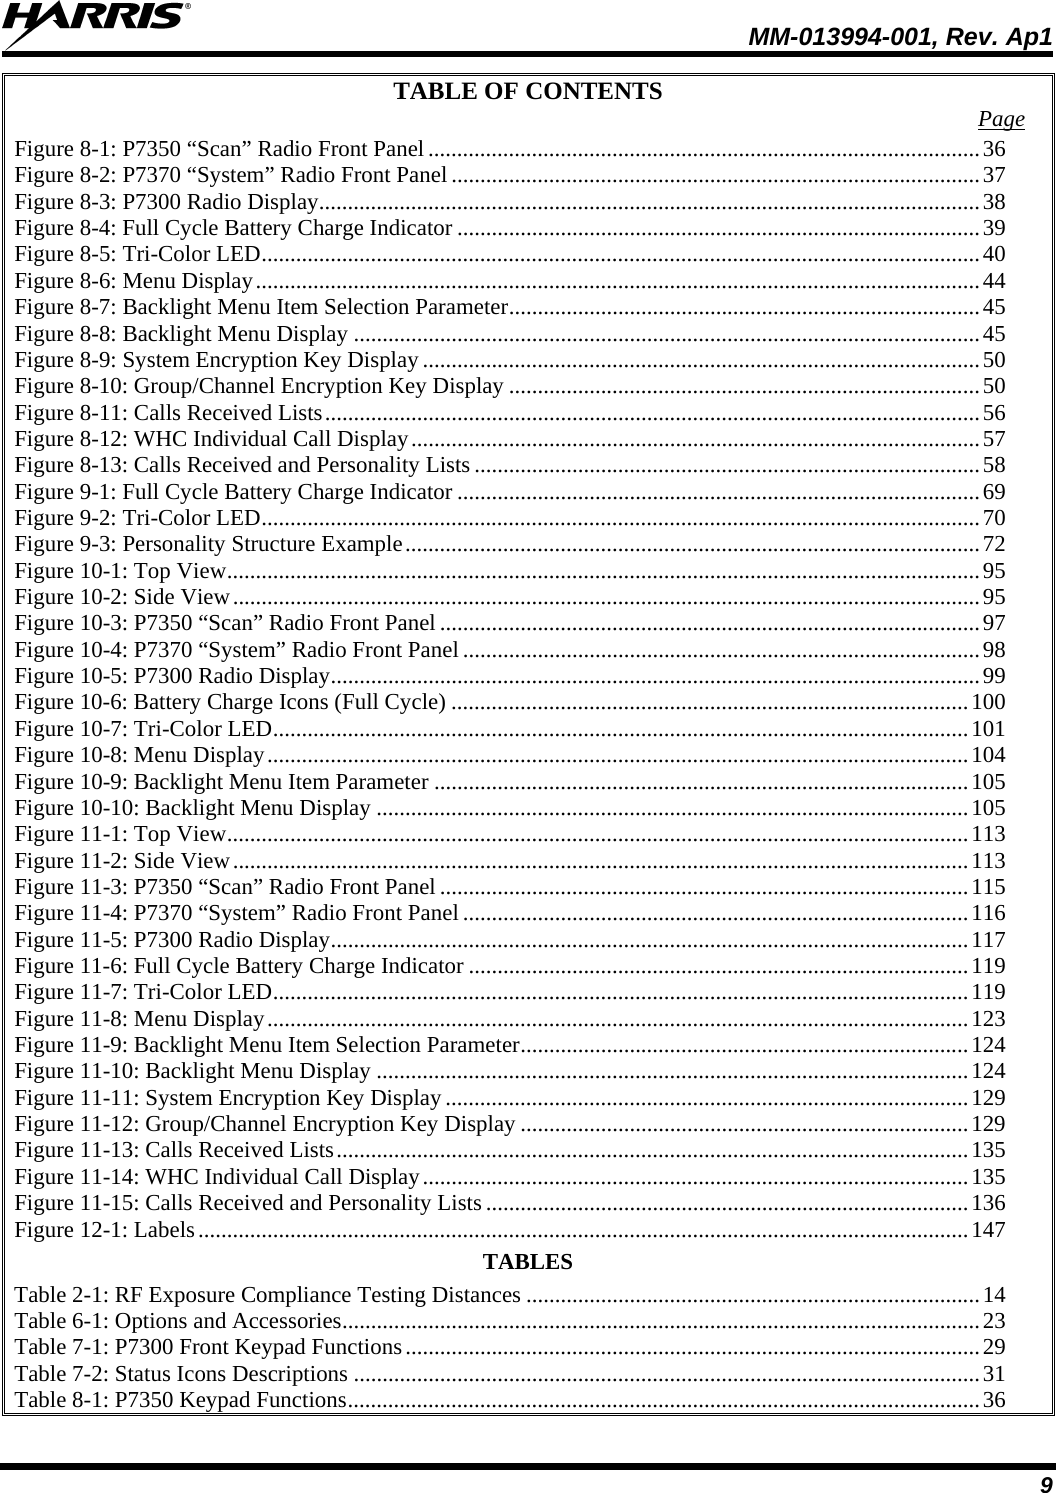  MM-013994-001, Rev. Ap1 9 TABLE OF CONTENTS  Page Figure 8-1: P7350 “Scan” Radio Front Panel................................................................................................36 Figure 8-2: P7370 “System” Radio Front Panel ............................................................................................37 Figure 8-3: P7300 Radio Display...................................................................................................................38 Figure 8-4: Full Cycle Battery Charge Indicator ...........................................................................................39 Figure 8-5: Tri-Color LED.............................................................................................................................40 Figure 8-6: Menu Display..............................................................................................................................44 Figure 8-7: Backlight Menu Item Selection Parameter..................................................................................45 Figure 8-8: Backlight Menu Display .............................................................................................................45 Figure 8-9: System Encryption Key Display .................................................................................................50 Figure 8-10: Group/Channel Encryption Key Display ..................................................................................50 Figure 8-11: Calls Received Lists..................................................................................................................56 Figure 8-12: WHC Individual Call Display...................................................................................................57 Figure 8-13: Calls Received and Personality Lists ........................................................................................58 Figure 9-1: Full Cycle Battery Charge Indicator ...........................................................................................69 Figure 9-2: Tri-Color LED.............................................................................................................................70 Figure 9-3: Personality Structure Example....................................................................................................72 Figure 10-1: Top View...................................................................................................................................95 Figure 10-2: Side View..................................................................................................................................95 Figure 10-3: P7350 “Scan” Radio Front Panel ..............................................................................................97 Figure 10-4: P7370 “System” Radio Front Panel ..........................................................................................98 Figure 10-5: P7300 Radio Display.................................................................................................................99 Figure 10-6: Battery Charge Icons (Full Cycle) ..........................................................................................100 Figure 10-7: Tri-Color LED.........................................................................................................................101 Figure 10-8: Menu Display..........................................................................................................................104 Figure 10-9: Backlight Menu Item Parameter .............................................................................................105 Figure 10-10: Backlight Menu Display .......................................................................................................105 Figure 11-1: Top View.................................................................................................................................113 Figure 11-2: Side View................................................................................................................................113 Figure 11-3: P7350 “Scan” Radio Front Panel ............................................................................................115 Figure 11-4: P7370 “System” Radio Front Panel ........................................................................................116 Figure 11-5: P7300 Radio Display...............................................................................................................117 Figure 11-6: Full Cycle Battery Charge Indicator .......................................................................................119 Figure 11-7: Tri-Color LED.........................................................................................................................119 Figure 11-8: Menu Display..........................................................................................................................123 Figure 11-9: Backlight Menu Item Selection Parameter..............................................................................124 Figure 11-10: Backlight Menu Display .......................................................................................................124 Figure 11-11: System Encryption Key Display...........................................................................................129 Figure 11-12: Group/Channel Encryption Key Display ..............................................................................129 Figure 11-13: Calls Received Lists..............................................................................................................135 Figure 11-14: WHC Individual Call Display...............................................................................................135 Figure 11-15: Calls Received and Personality Lists ....................................................................................136 Figure 12-1: Labels......................................................................................................................................147 TABLES Table 2-1: RF Exposure Compliance Testing Distances ...............................................................................14 Table 6-1: Options and Accessories...............................................................................................................23 Table 7-1: P7300 Front Keypad Functions....................................................................................................29 Table 7-2: Status Icons Descriptions .............................................................................................................31 Table 8-1: P7350 Keypad Functions..............................................................................................................36 